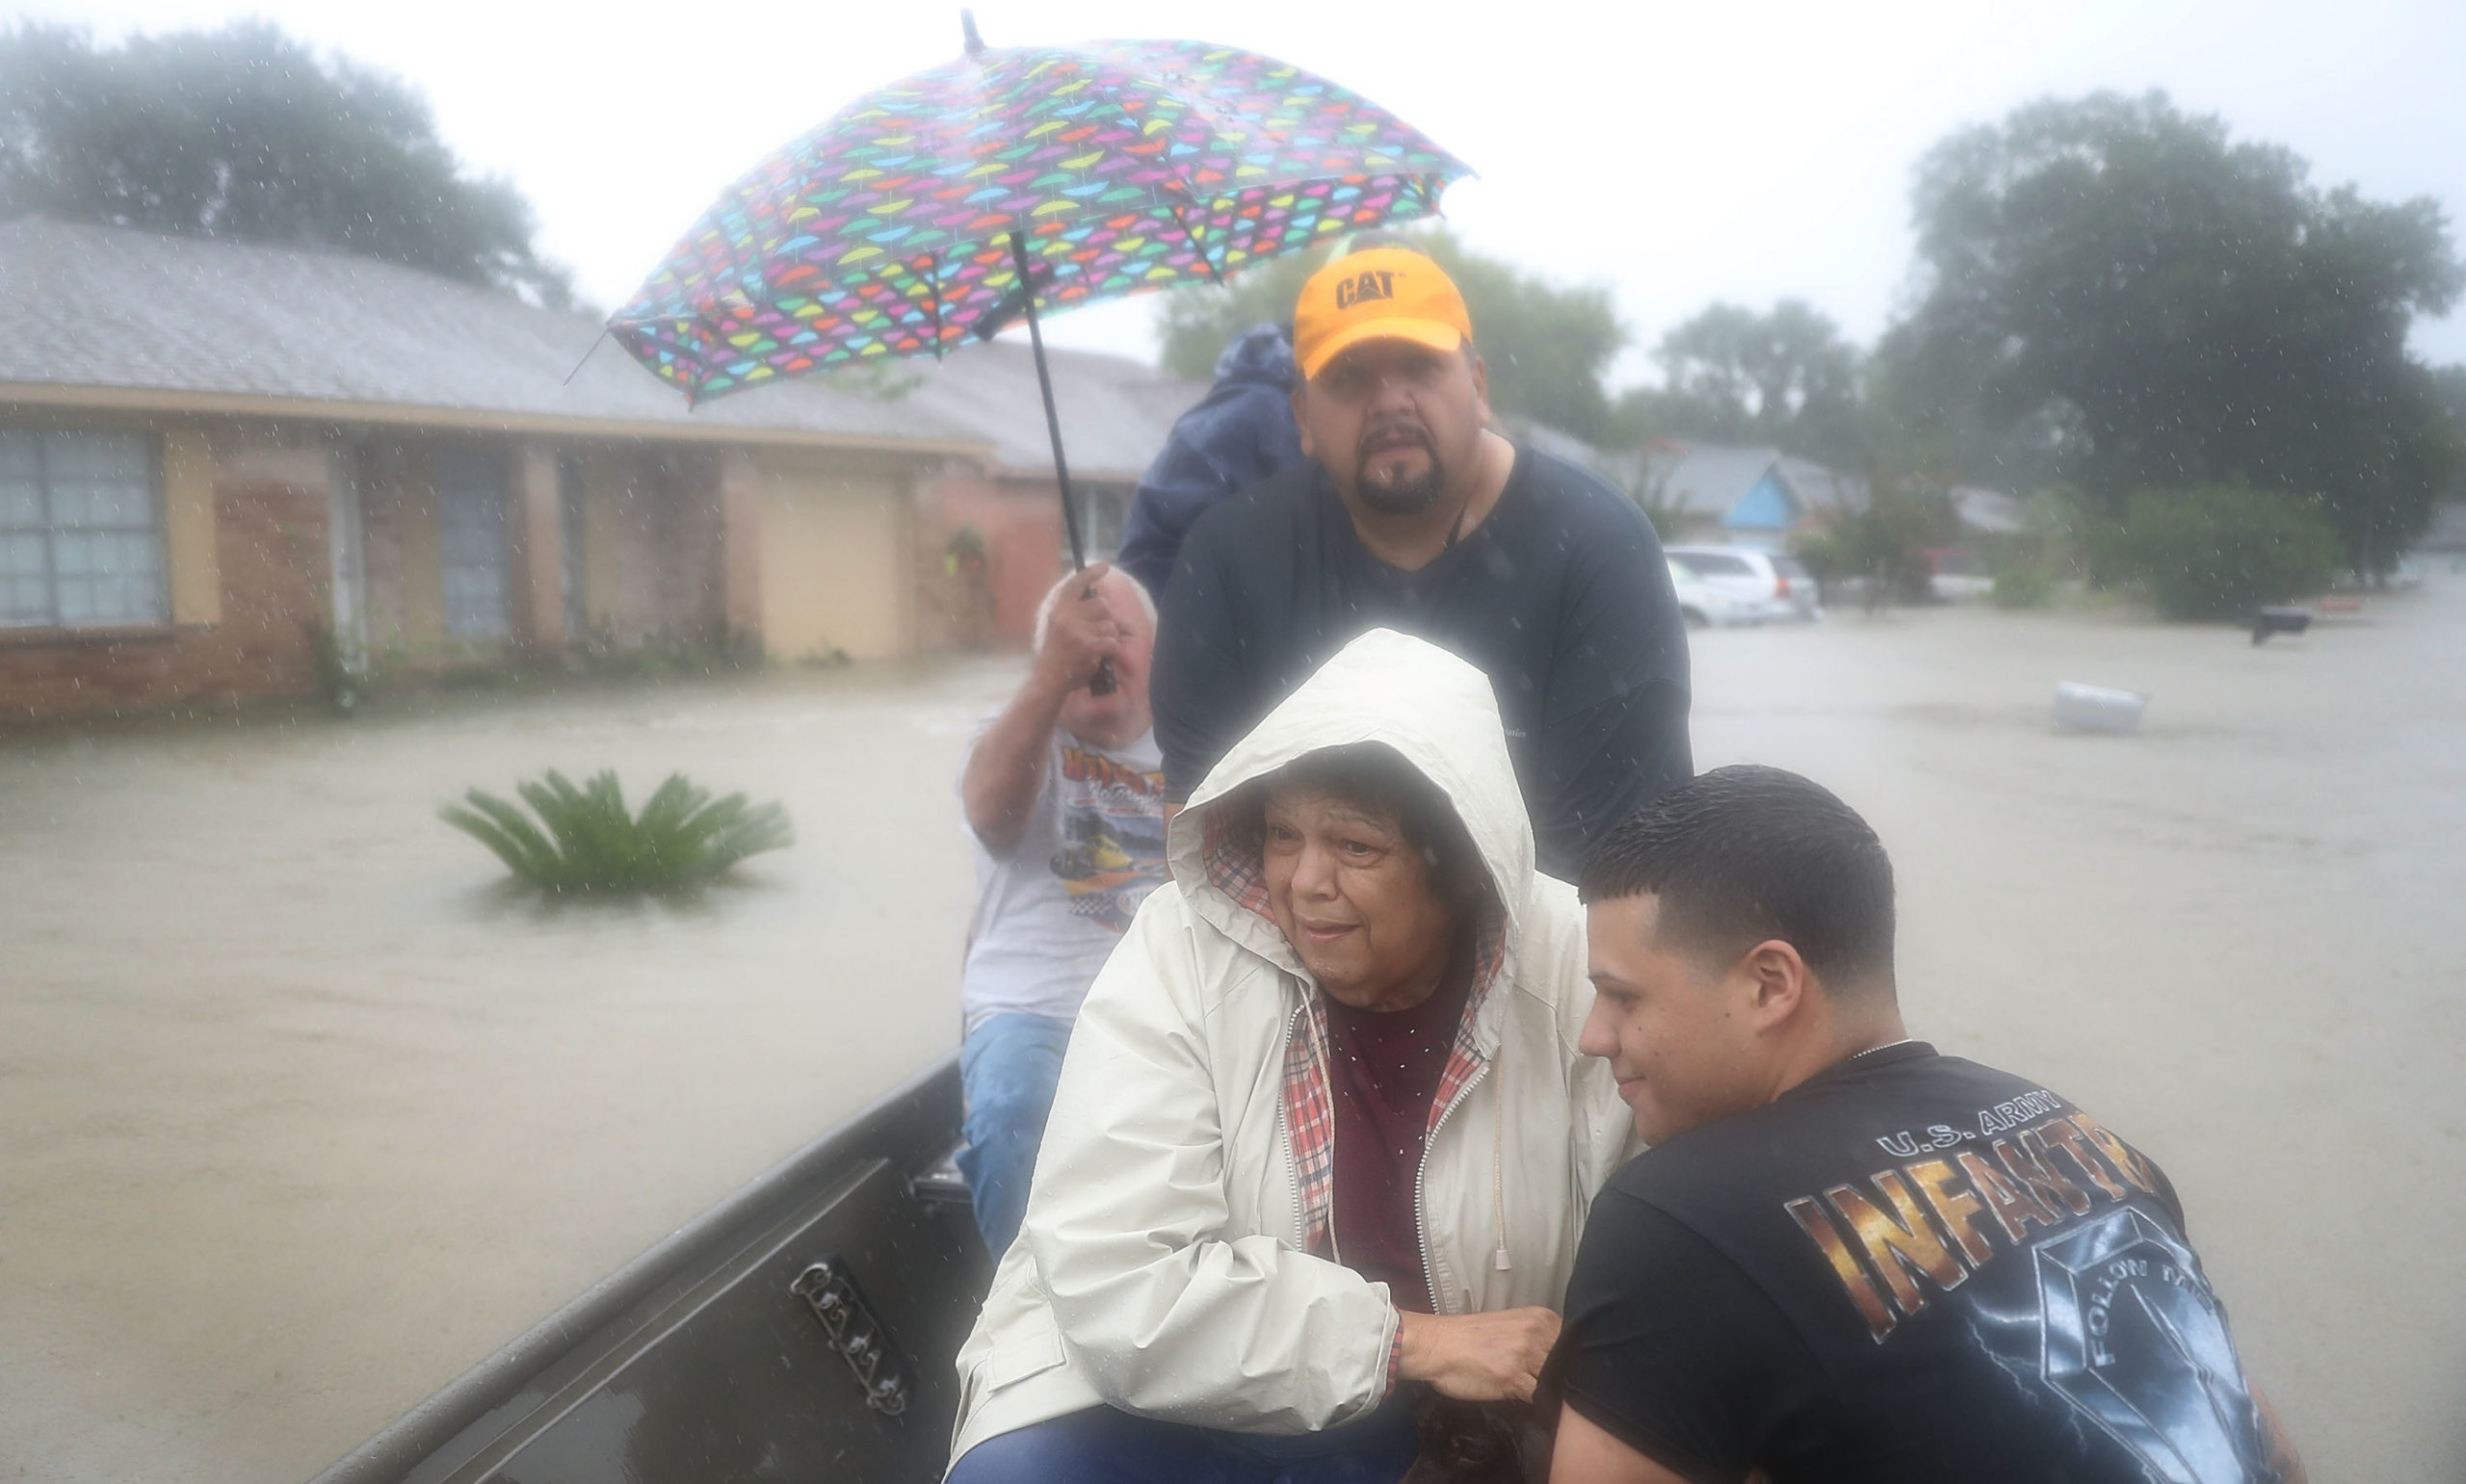 People evacuate in a boat from their homes after the area was inundated with flooding from Hurricane Harvey on Aug. 28, 2017 in Houston. (Photo: Joe Raedle, Getty Images)